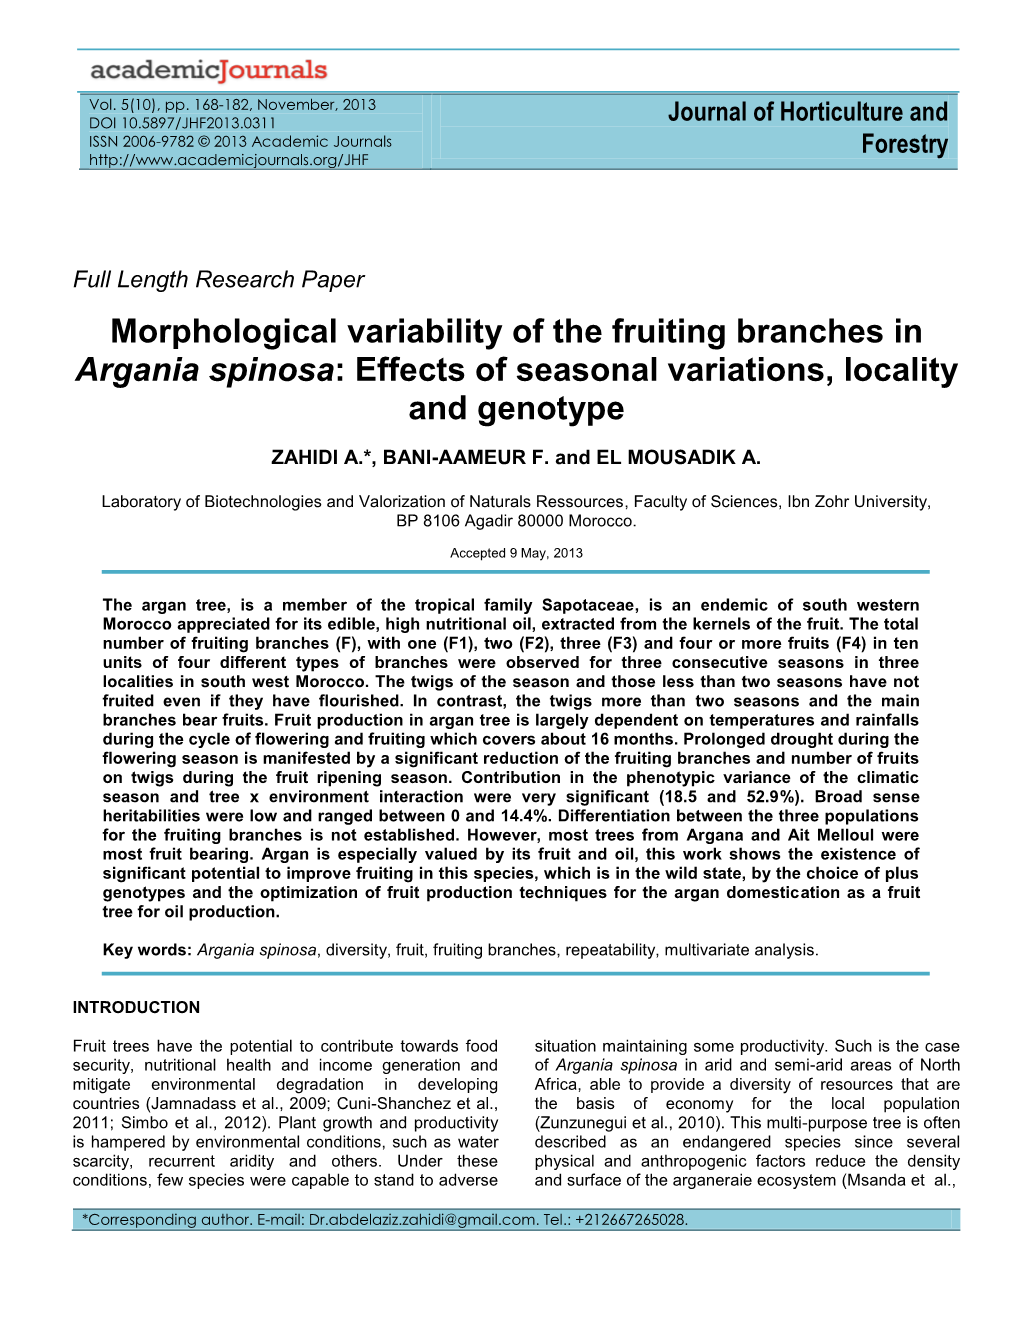 Morphological Variability of the Fruiting Branches in Argania Spinosa: Effects of Seasonal Variations, Locality and Genotype